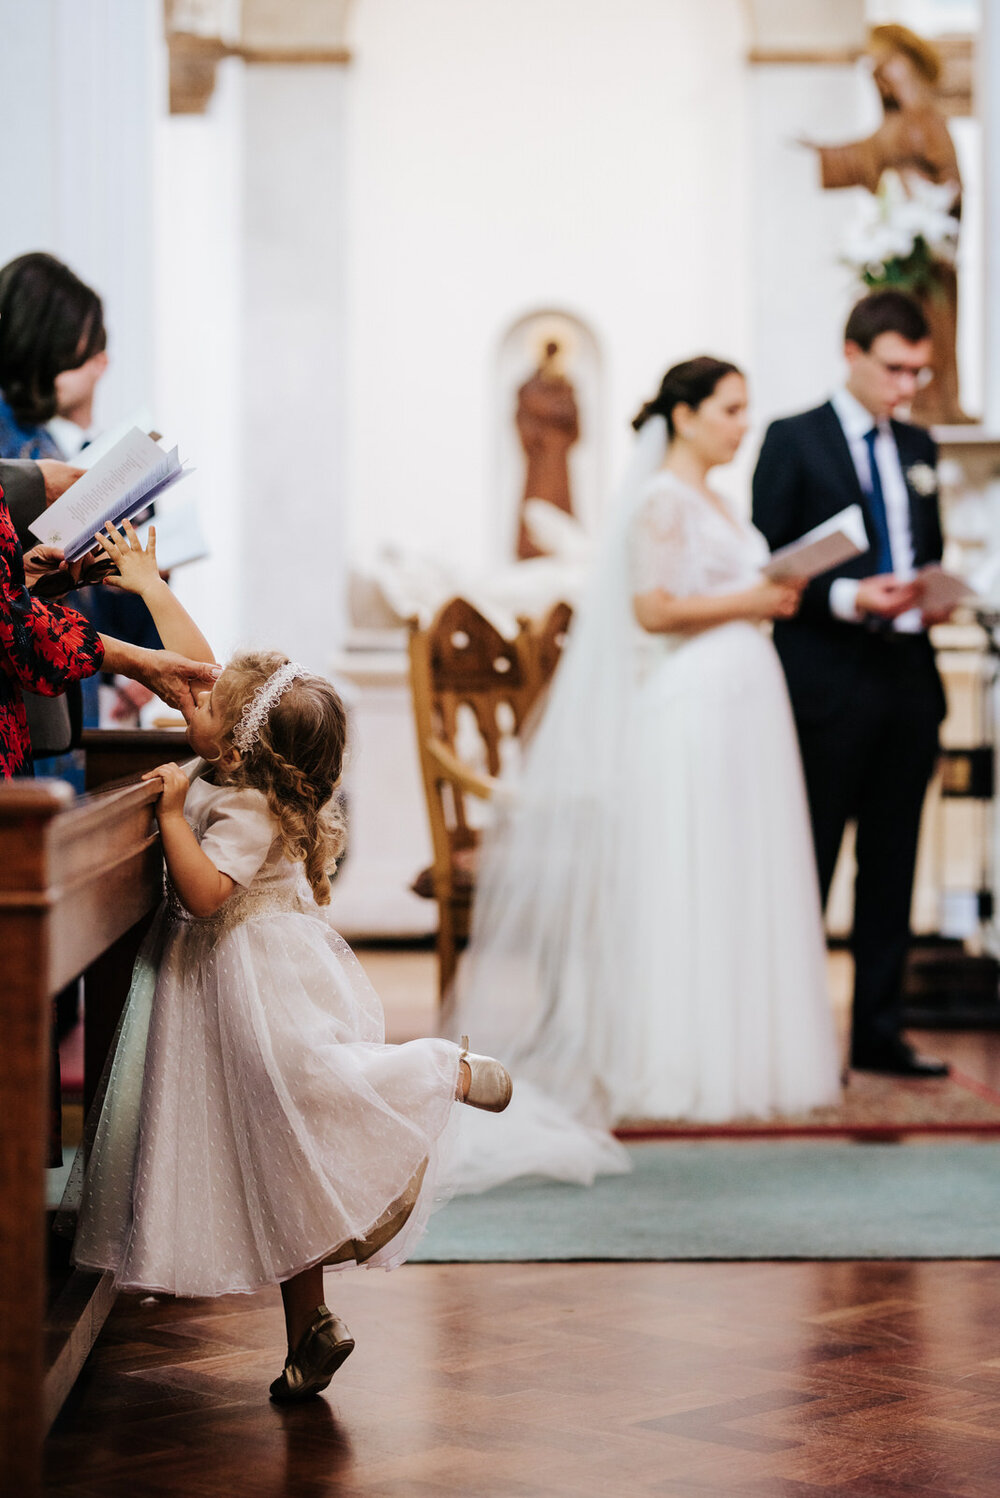 Little girl plays and twirls in church as bride and groom sing hymns in the background